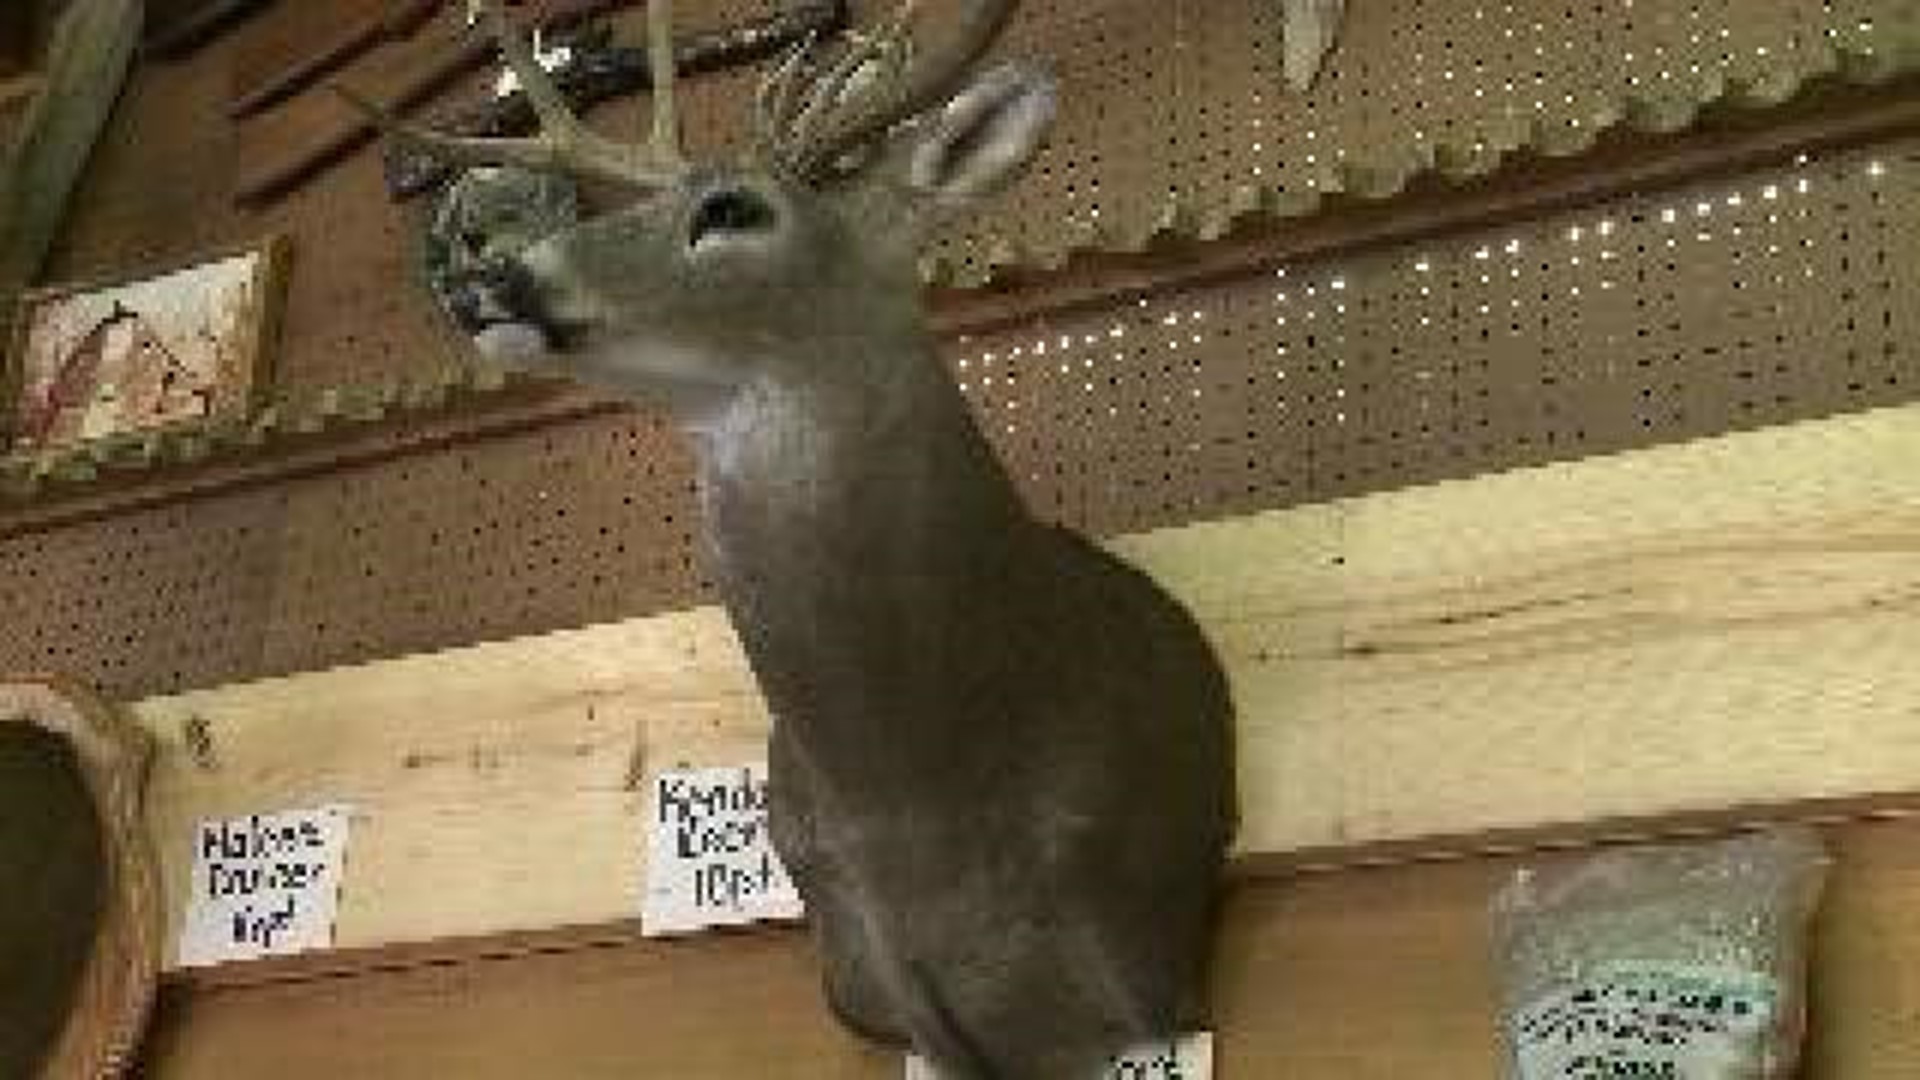 Top Prizes Awarded in the Big Buck Contest